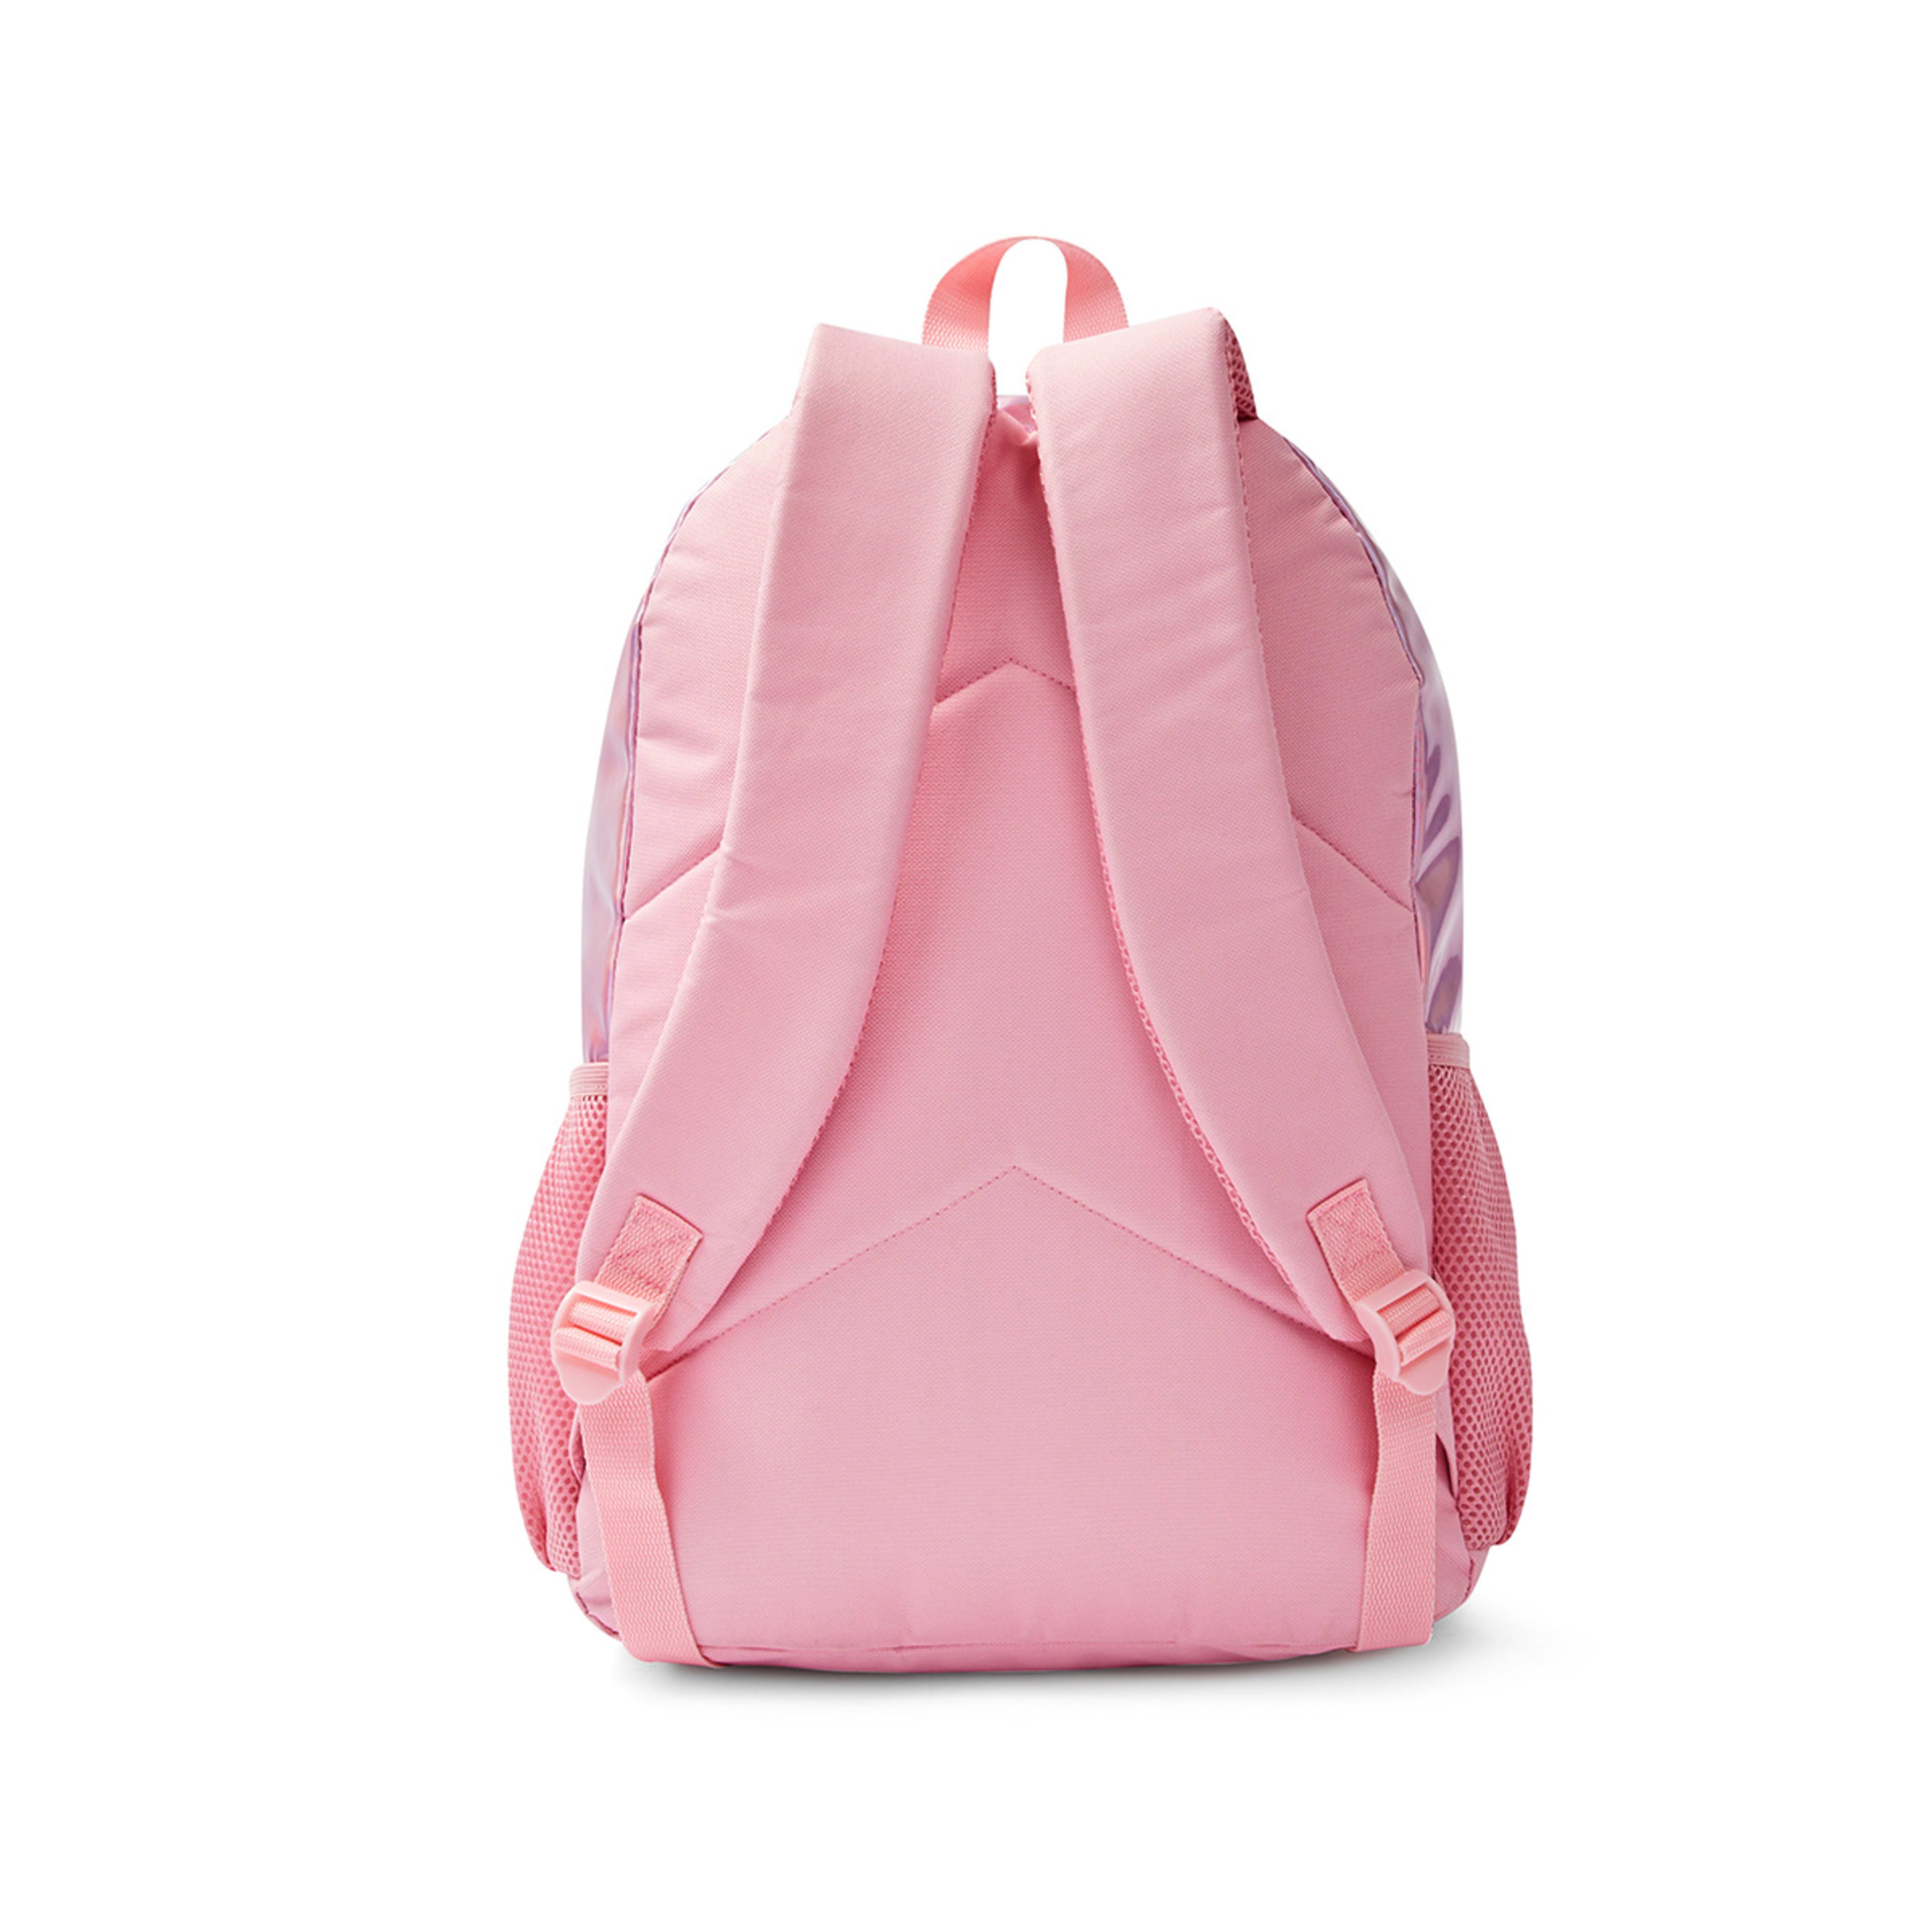 Mixed Plush Backpack - Pink - Kmart